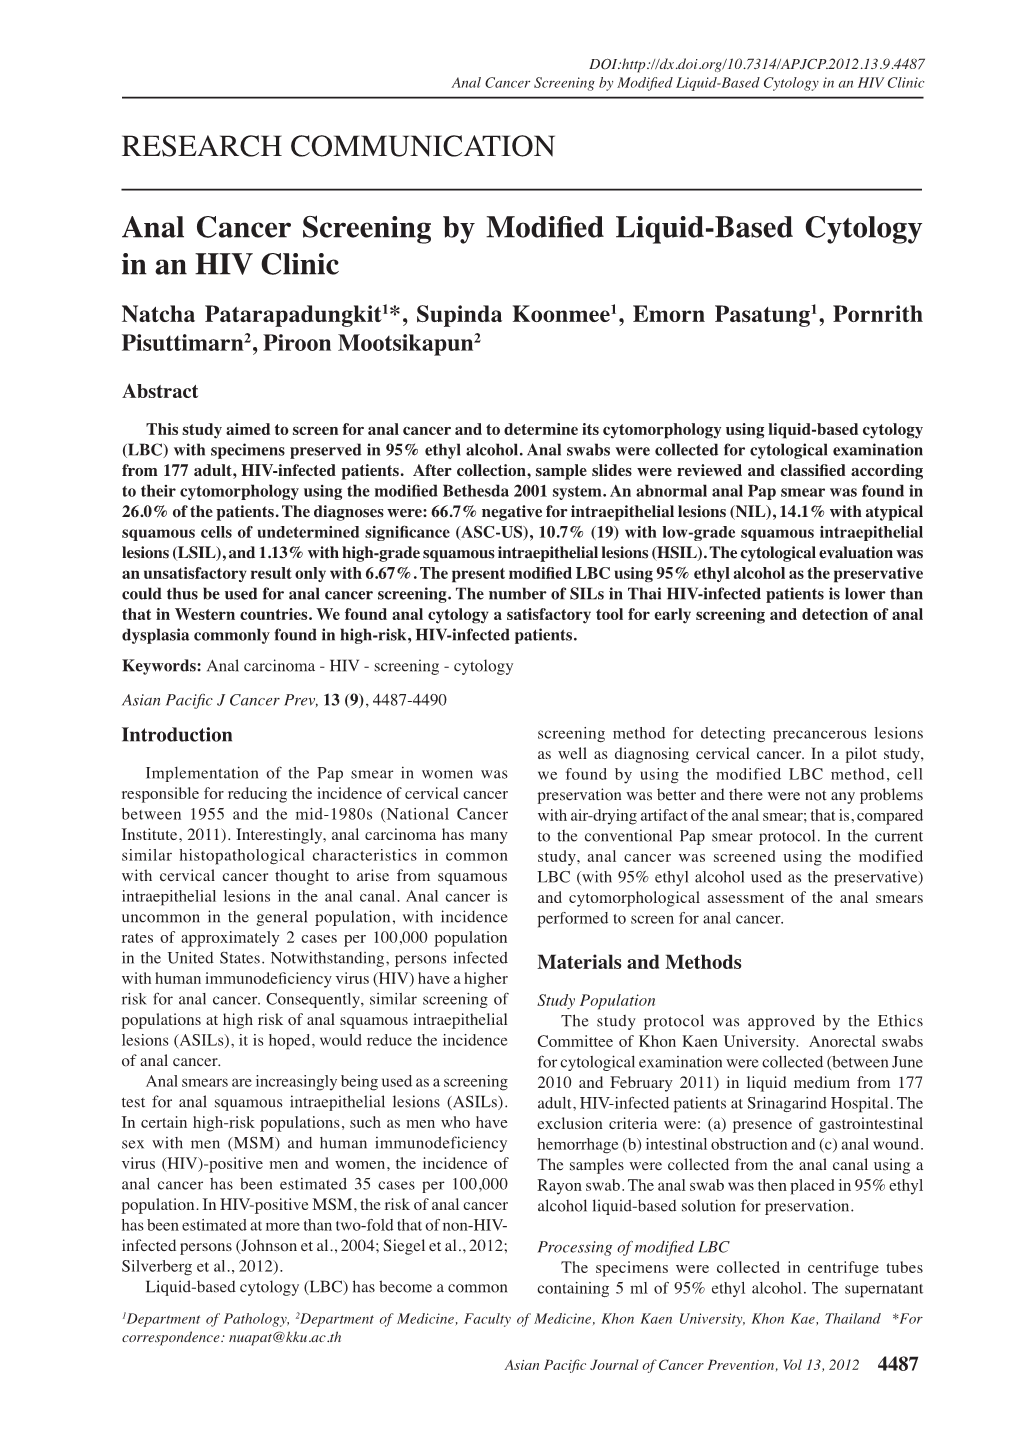 Anal Cancer Screening by Modified Liquid-Based Cytology in an HIV Clinic